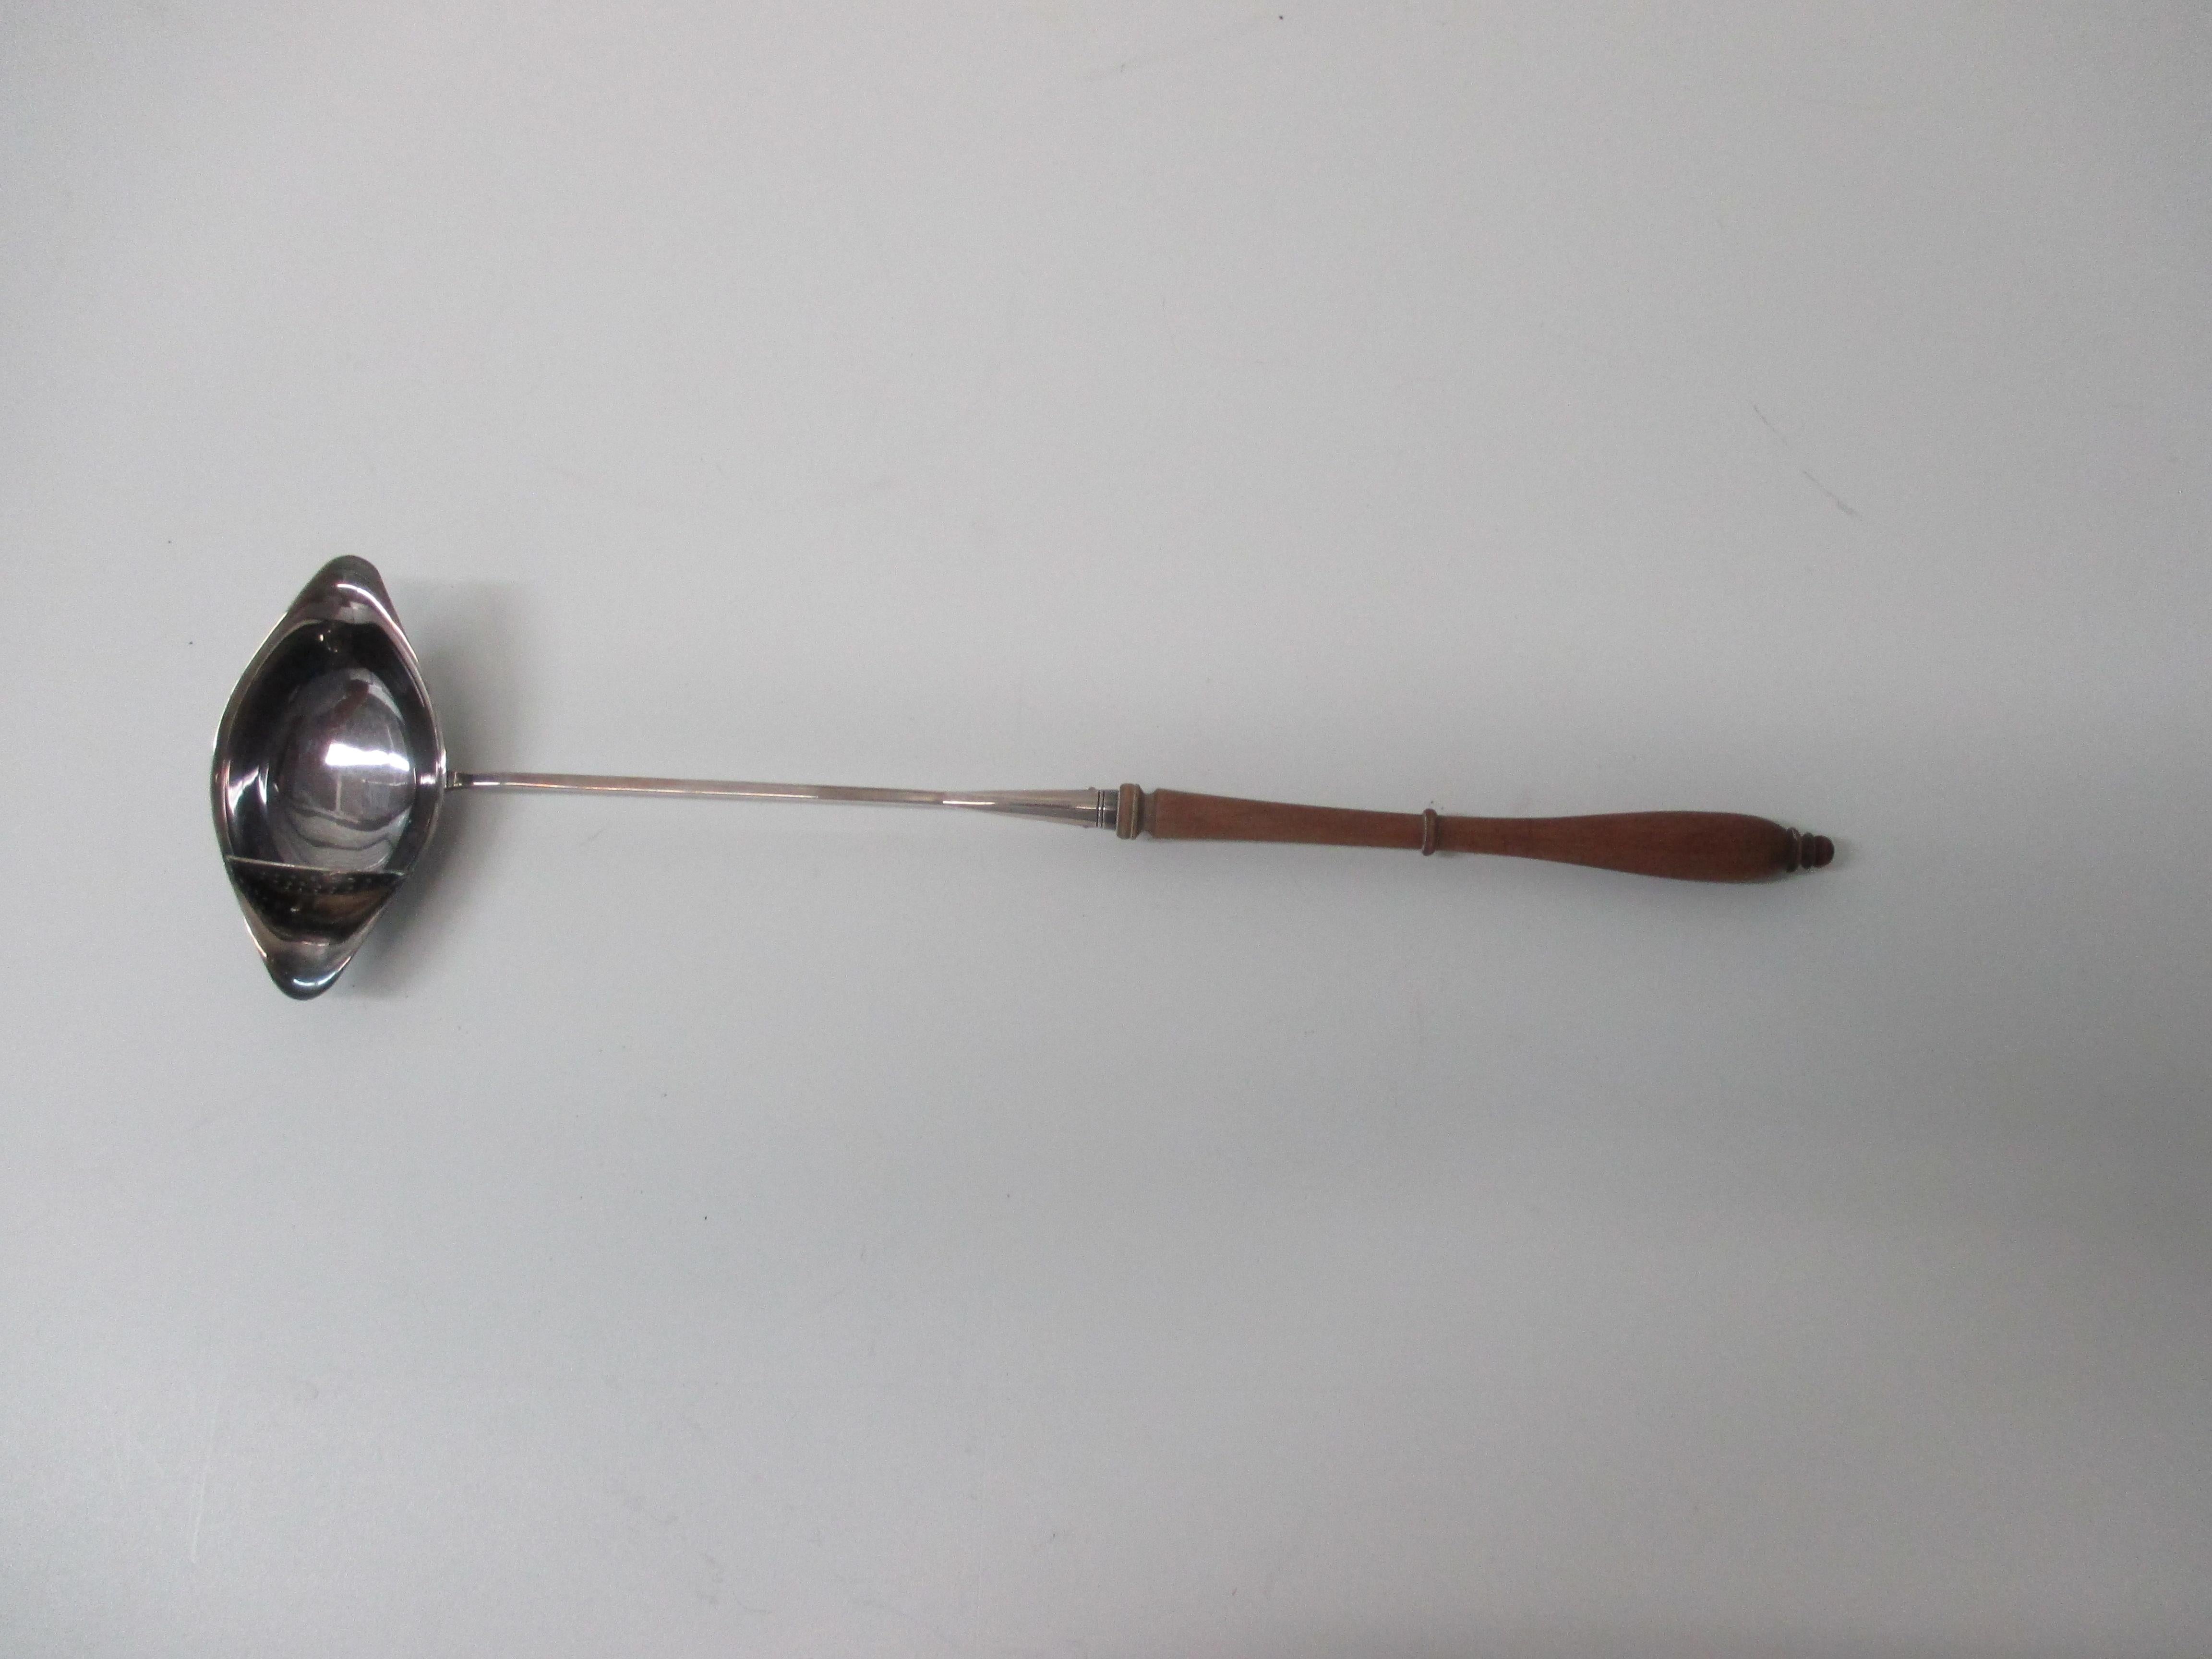 Vintage bar spoon with strainer in wood and stainless steel
Carved with stamp in the back
Size: 15.5